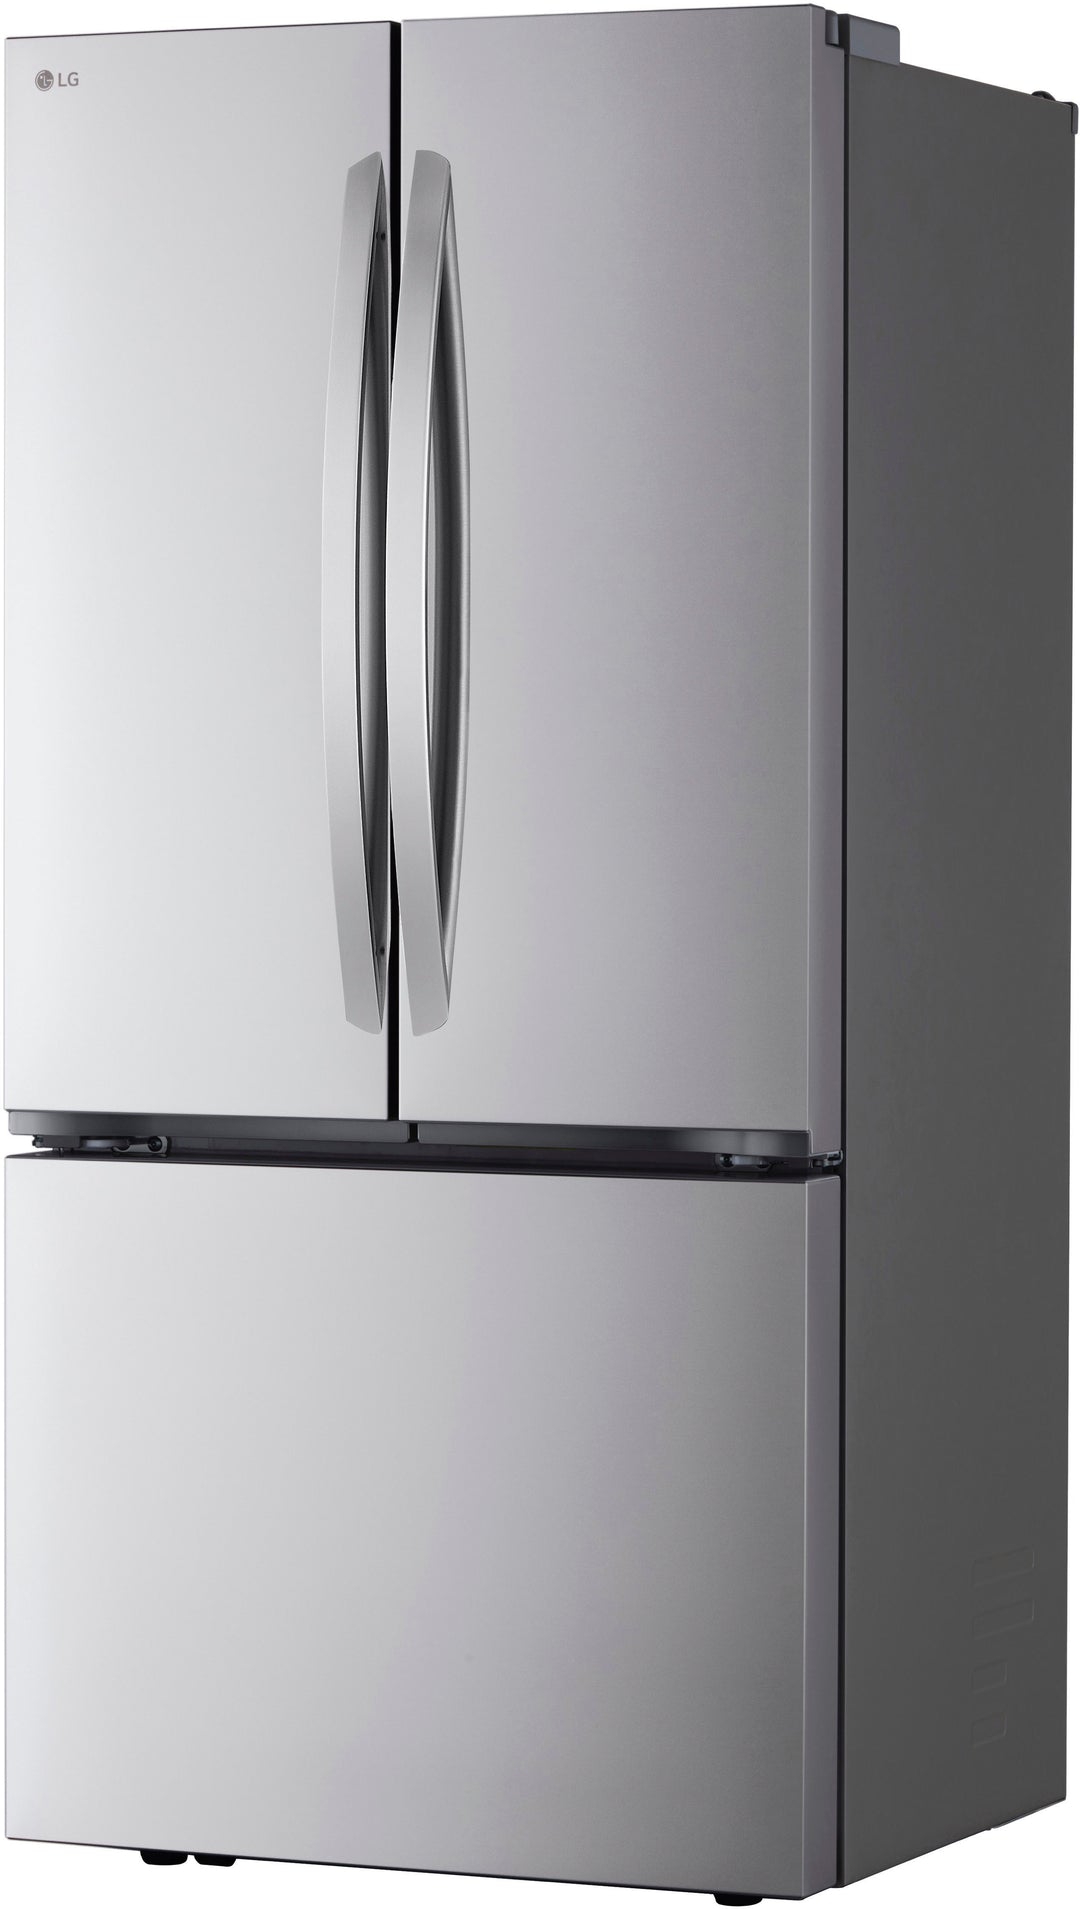 LG - 21 Cu. Ft. French Door Counter-Depth Smart Refrigerator with Ice - Stainless Steel_2